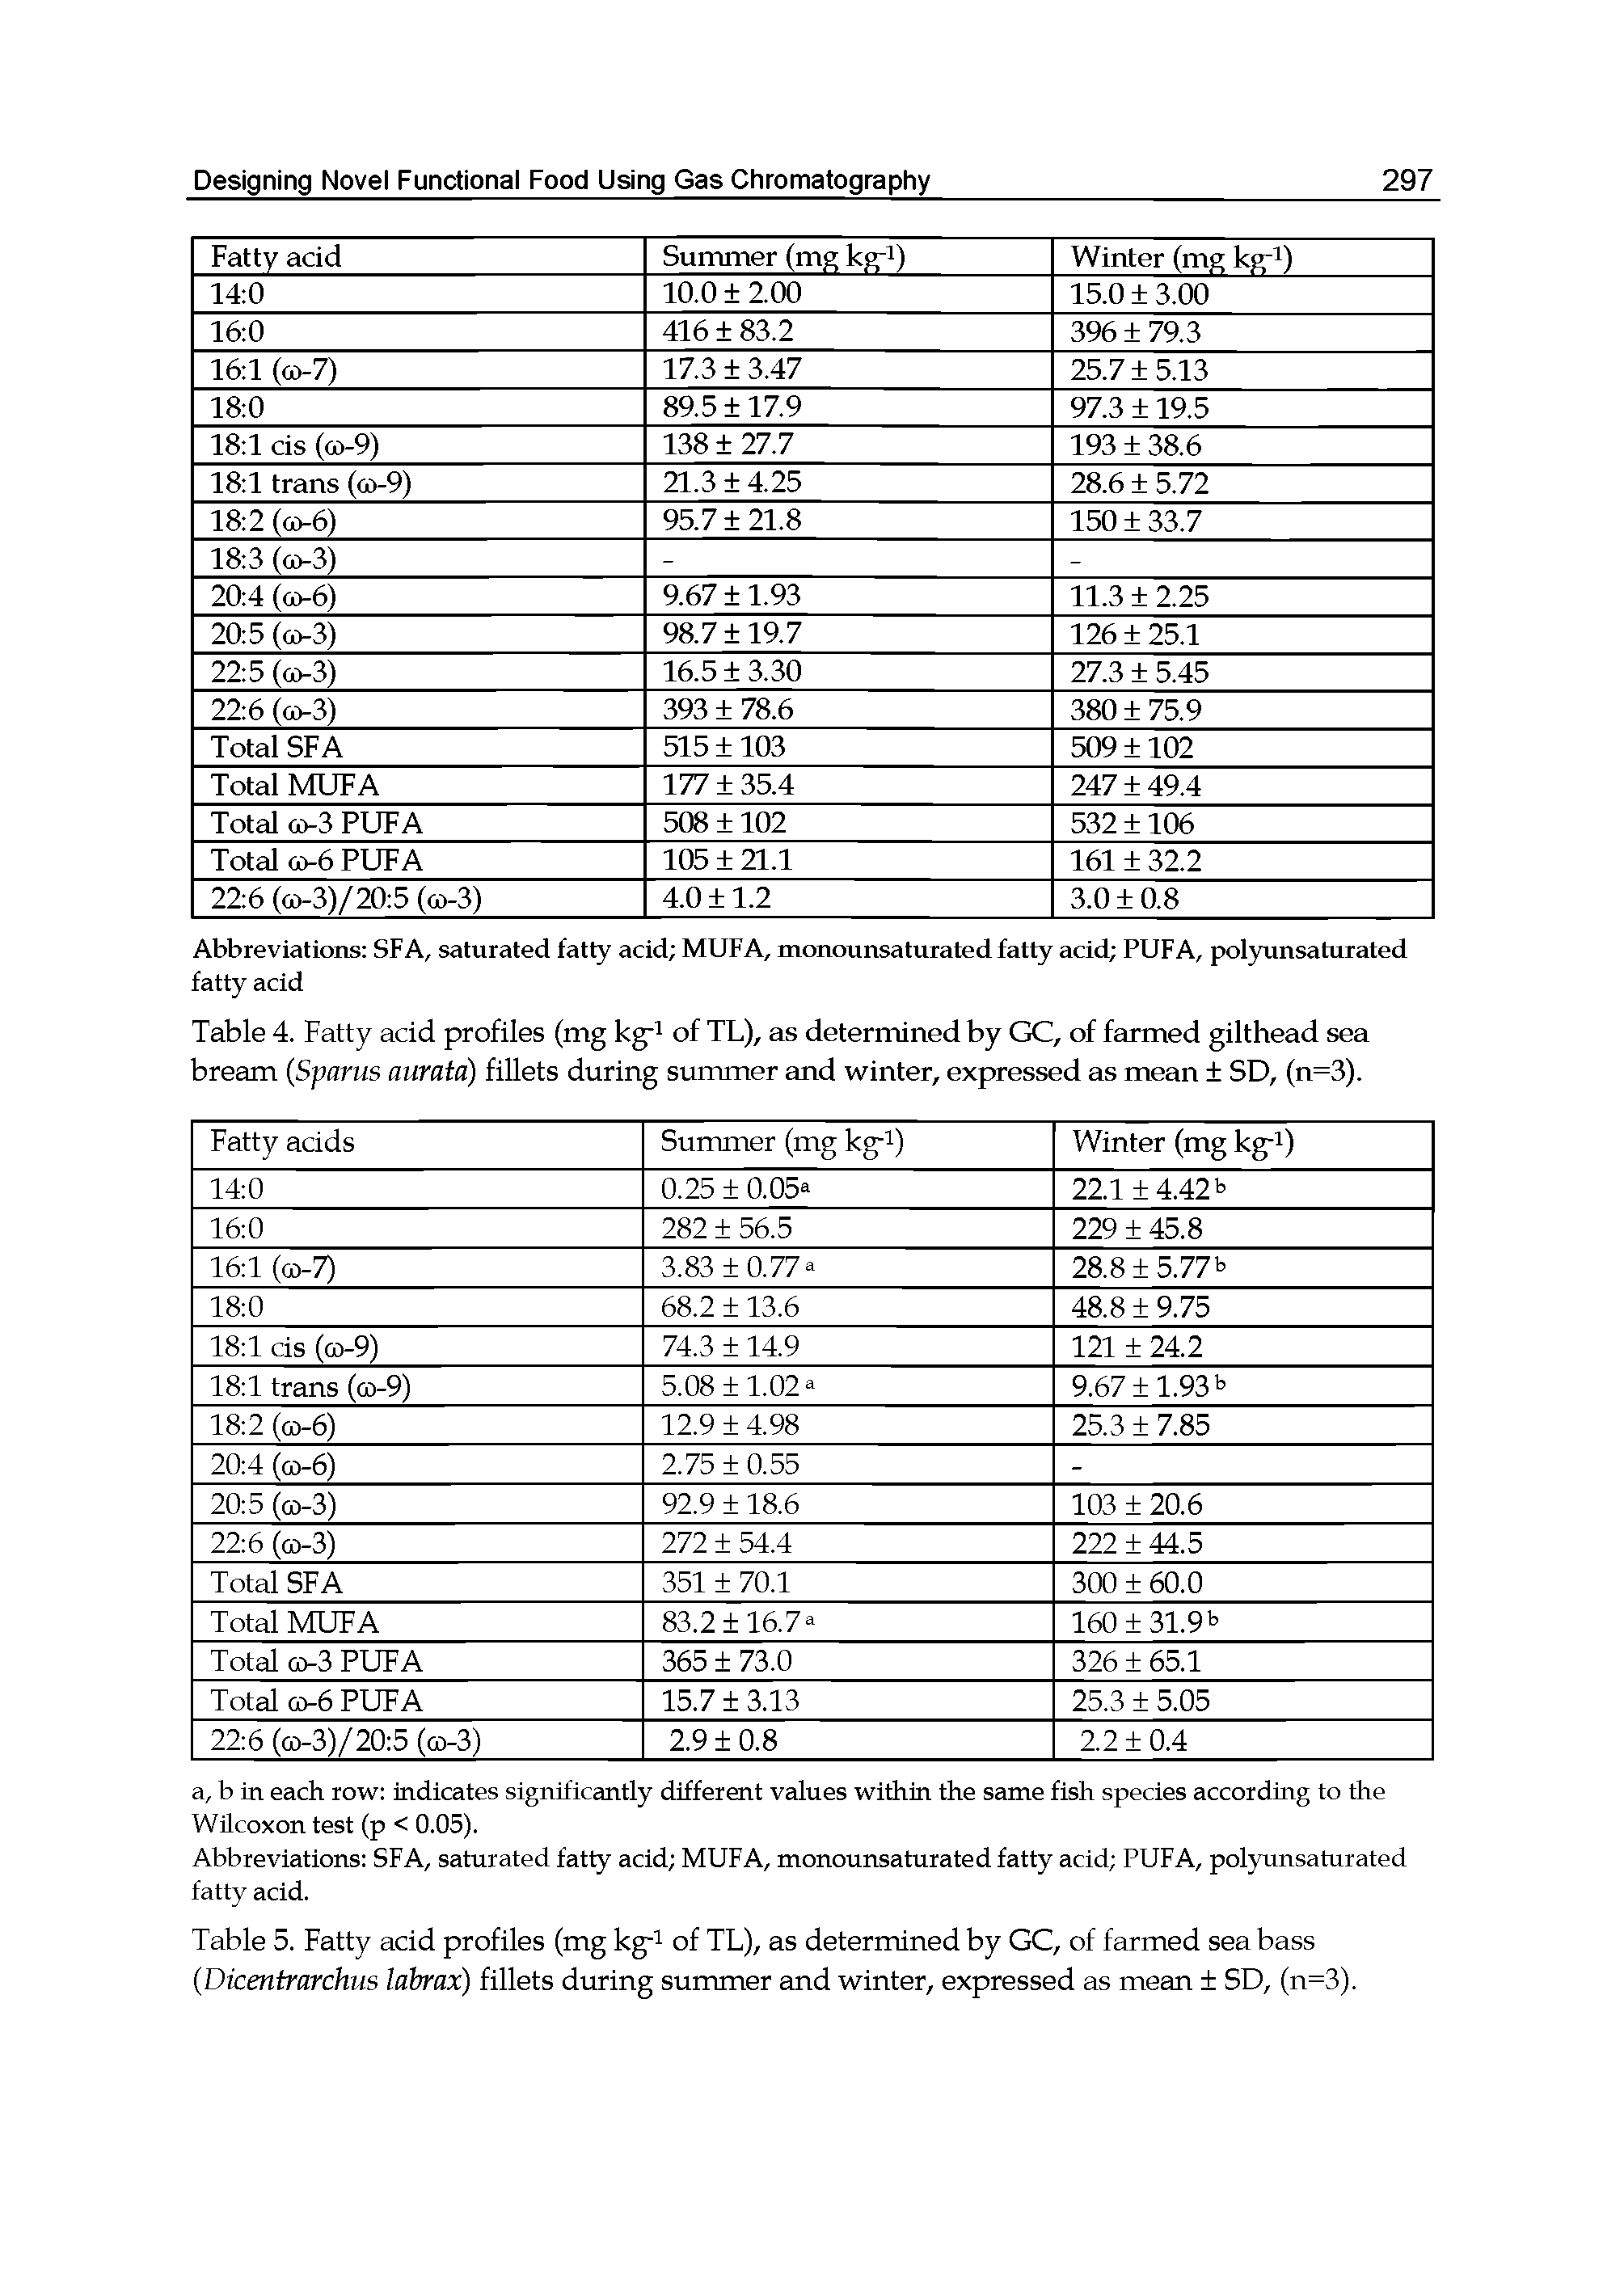 Table 5. Fatty acid profiles (mg kg-i of TL), as determined by GC, of farmed sea bass (Dicentrarchus labrax) fillets during summer and winter, expressed as mean SD, (n=3).